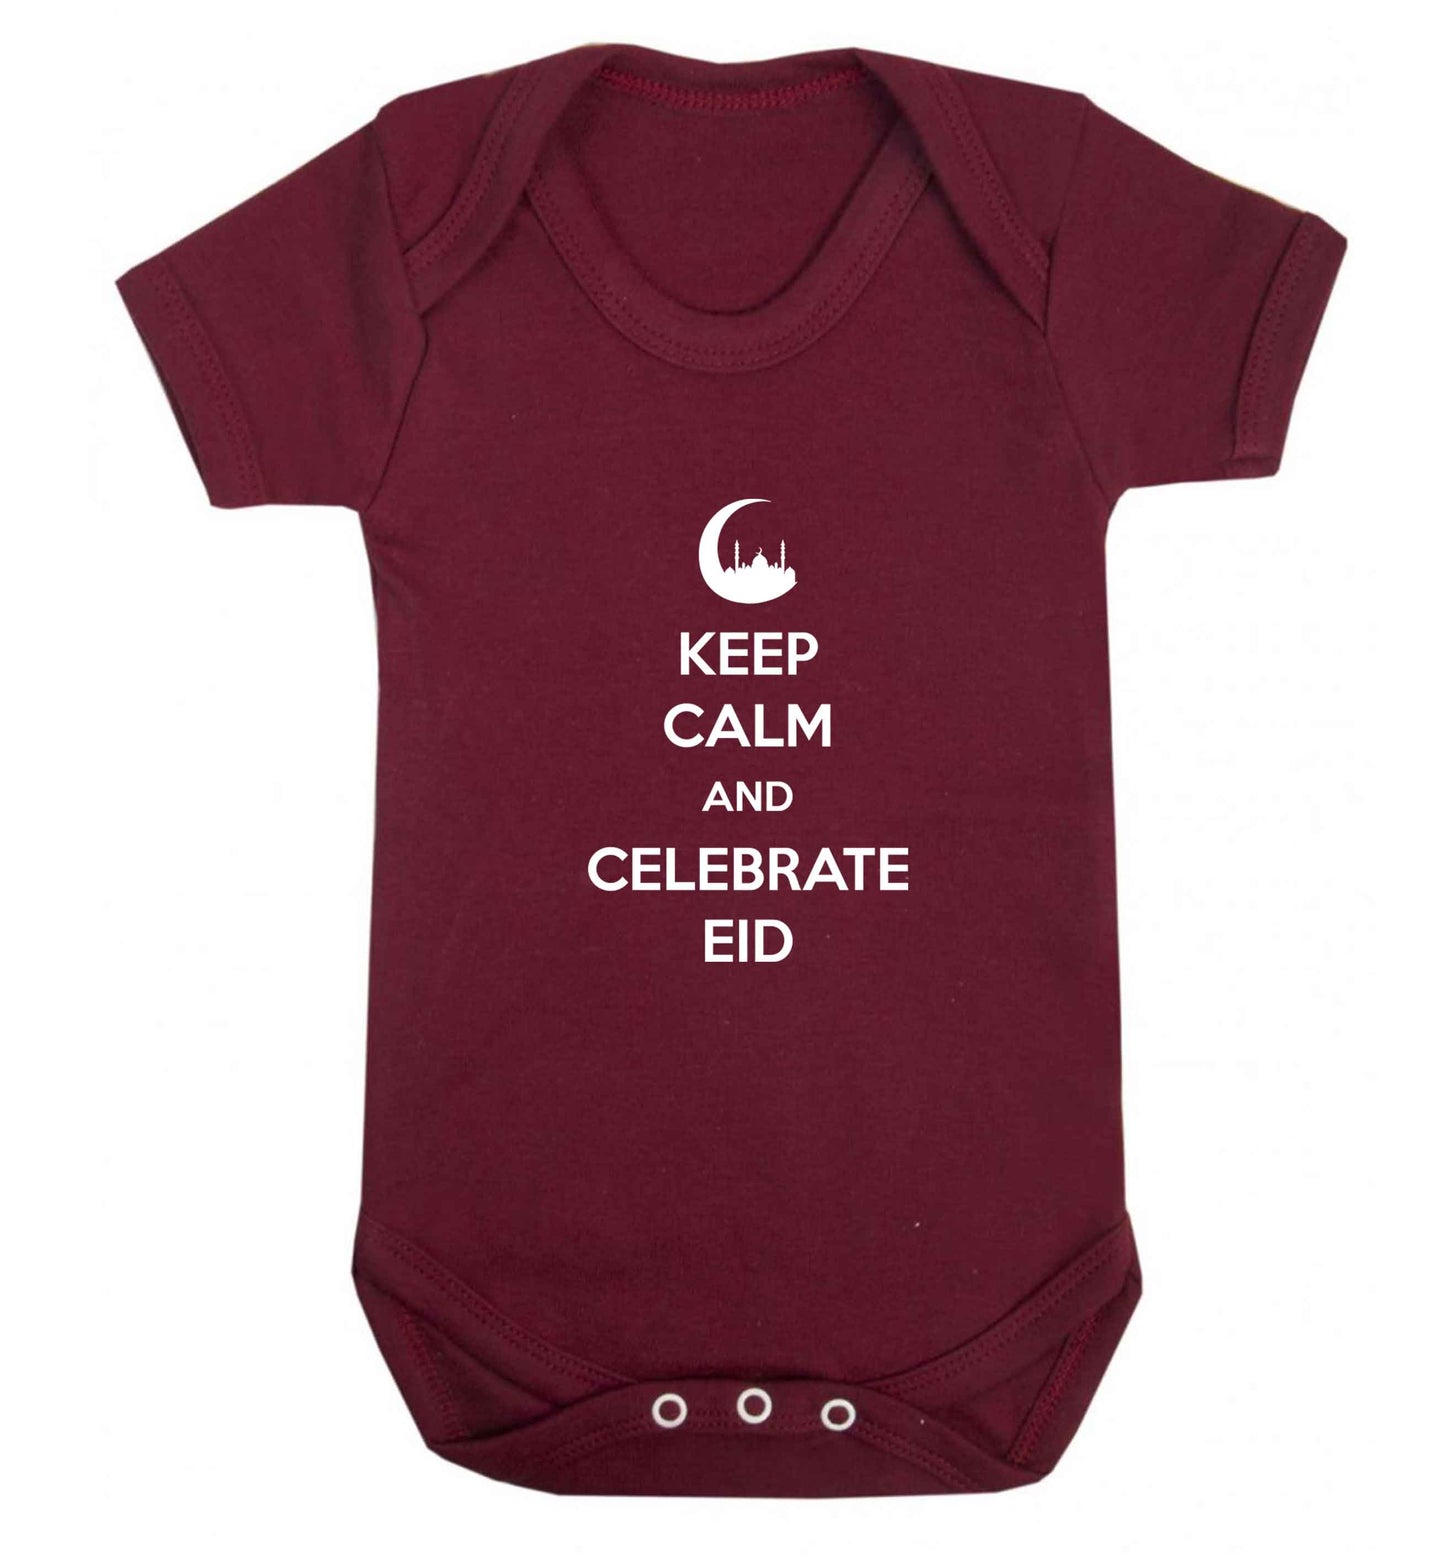 Keep calm and celebrate Eid baby vest maroon 18-24 months